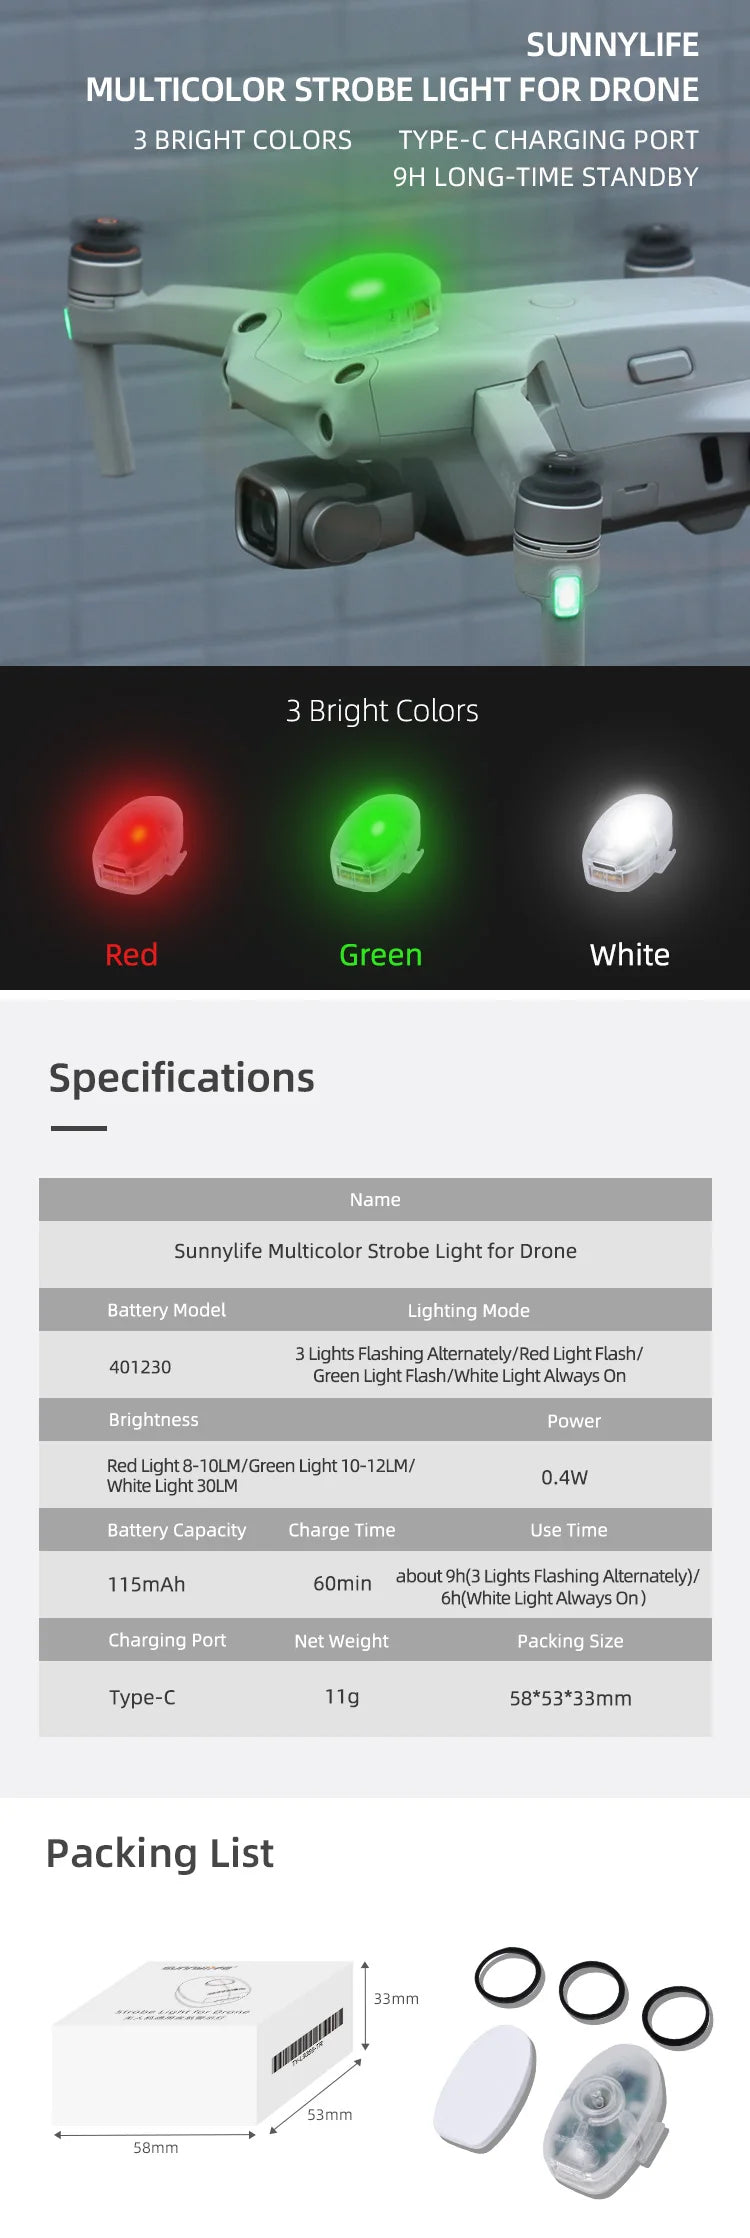 Sunnylife Multicolor Strobe Light for Drone 3 Bright Colors Red Green White Specifications